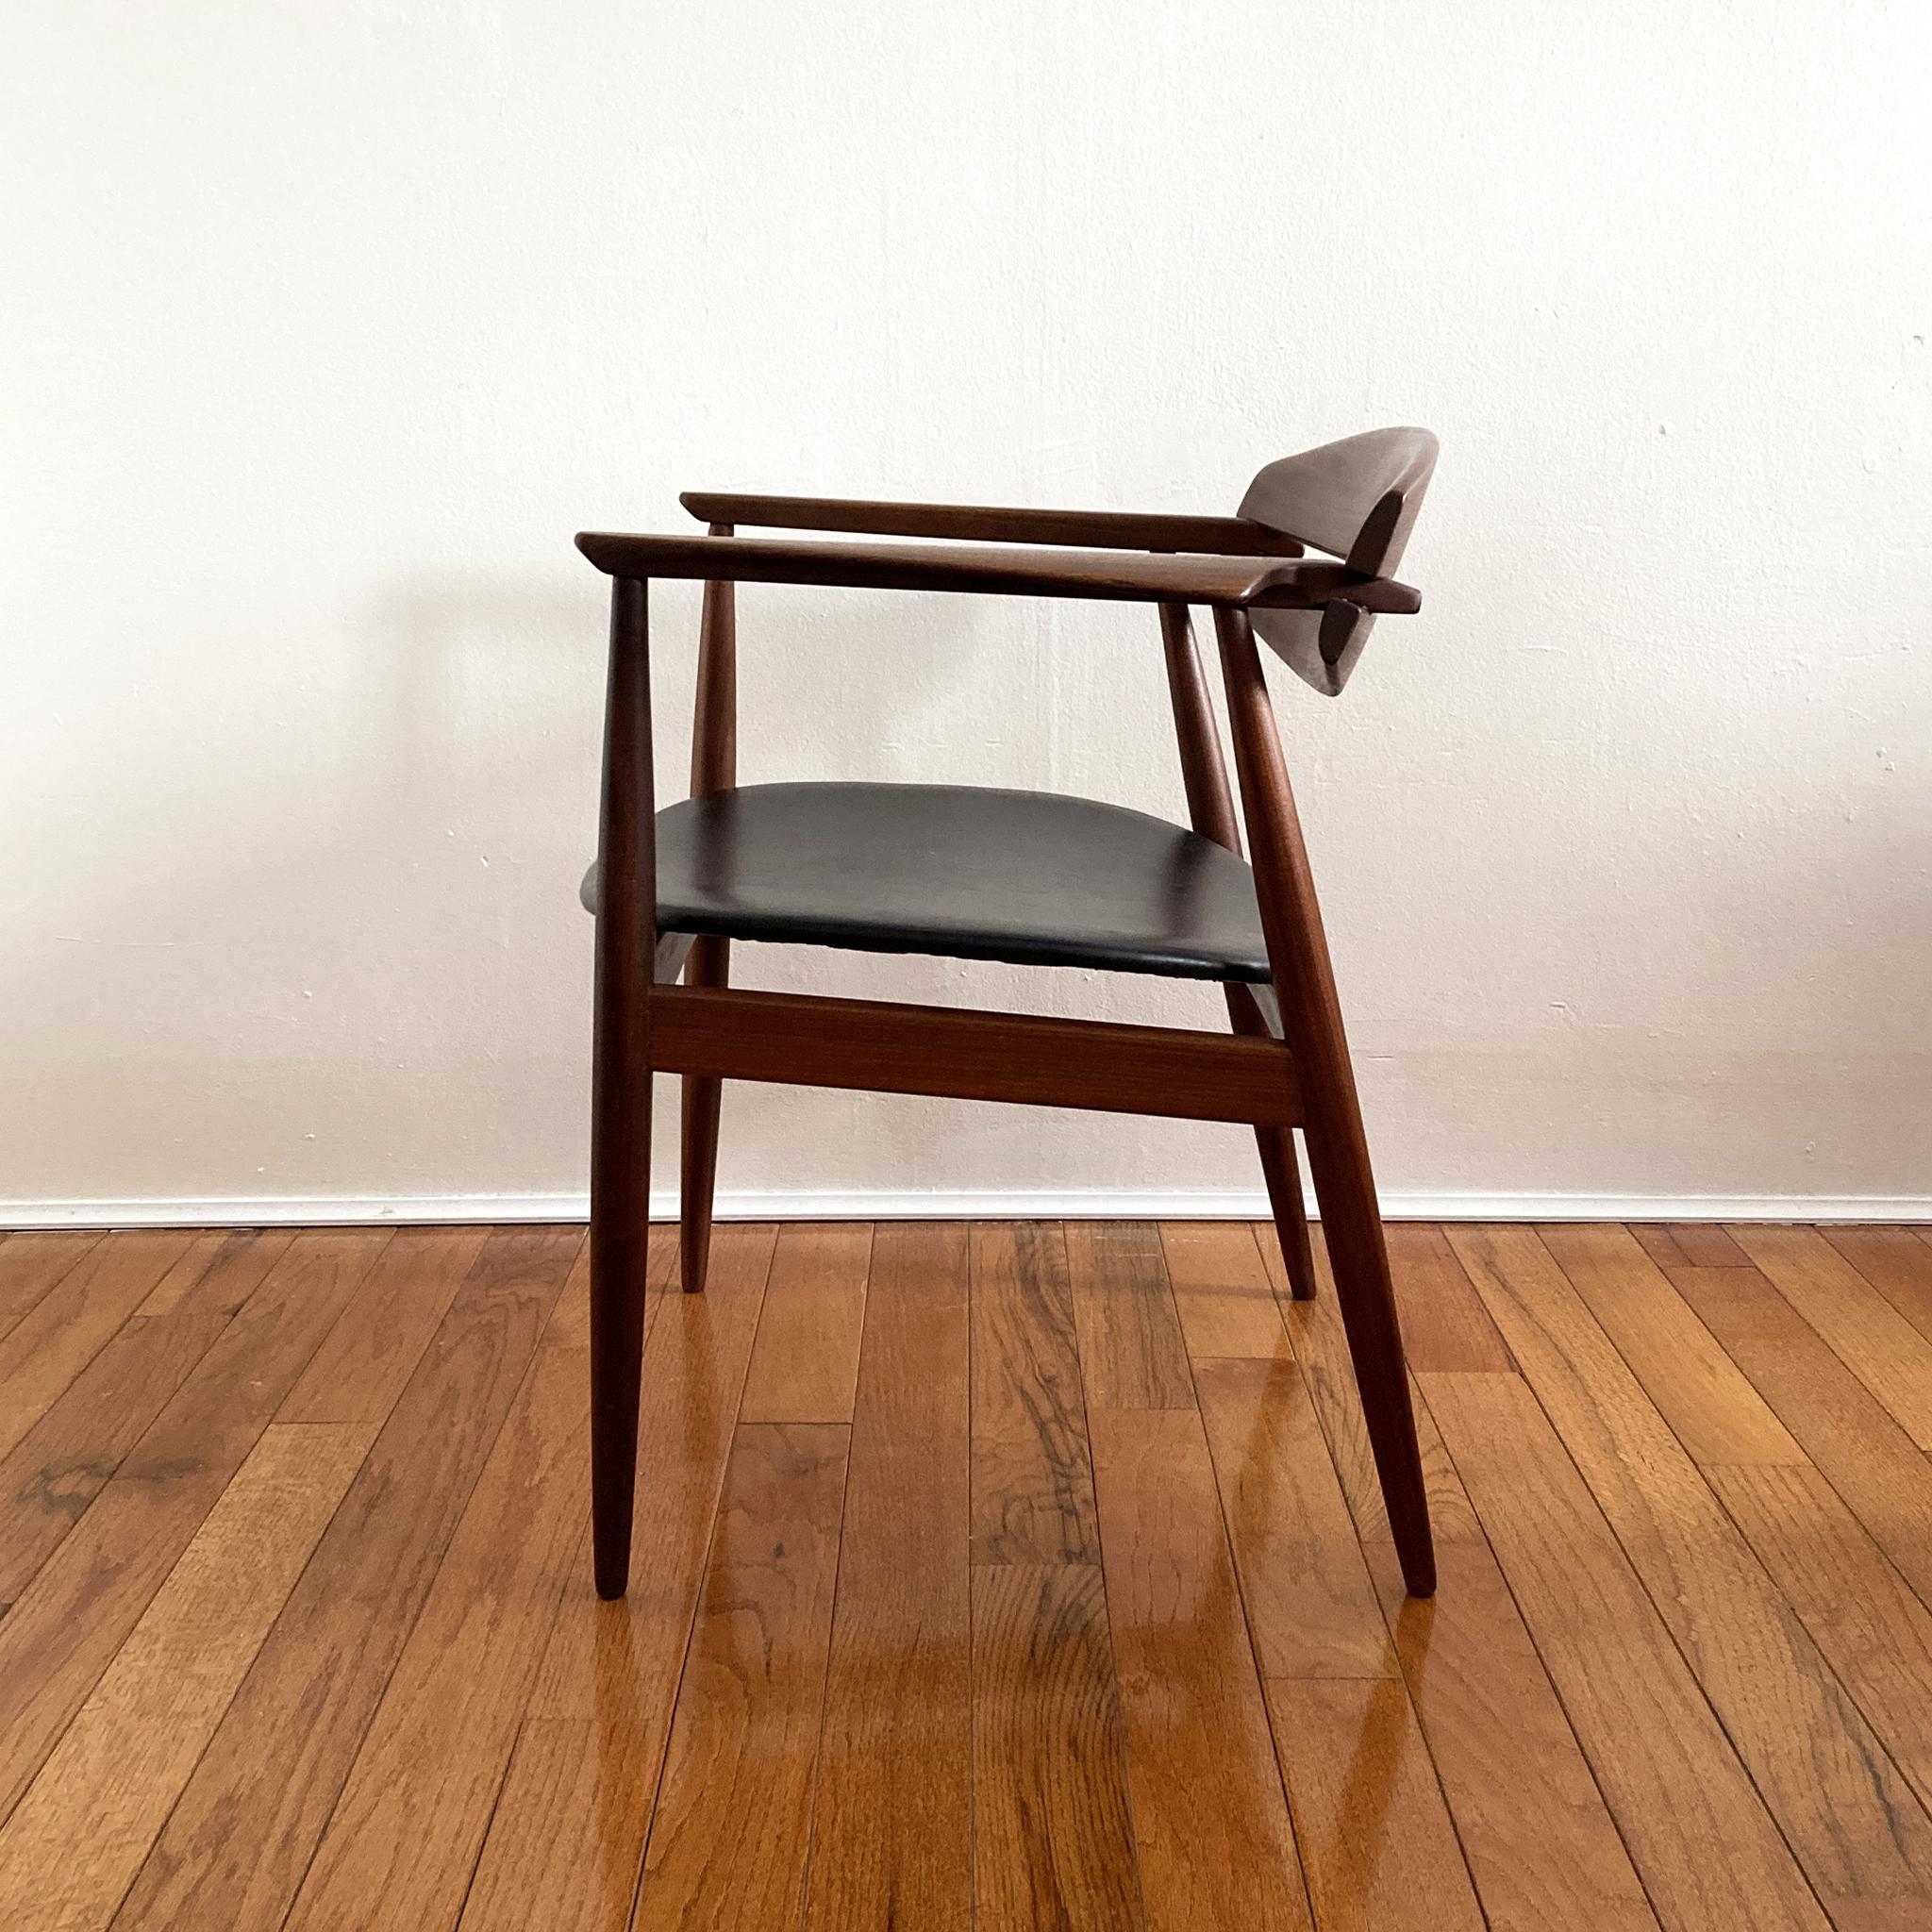 Mid-20th Century Sylvester & Matz Teak Chair with Black Faux Leather Seat, 1950s For Sale